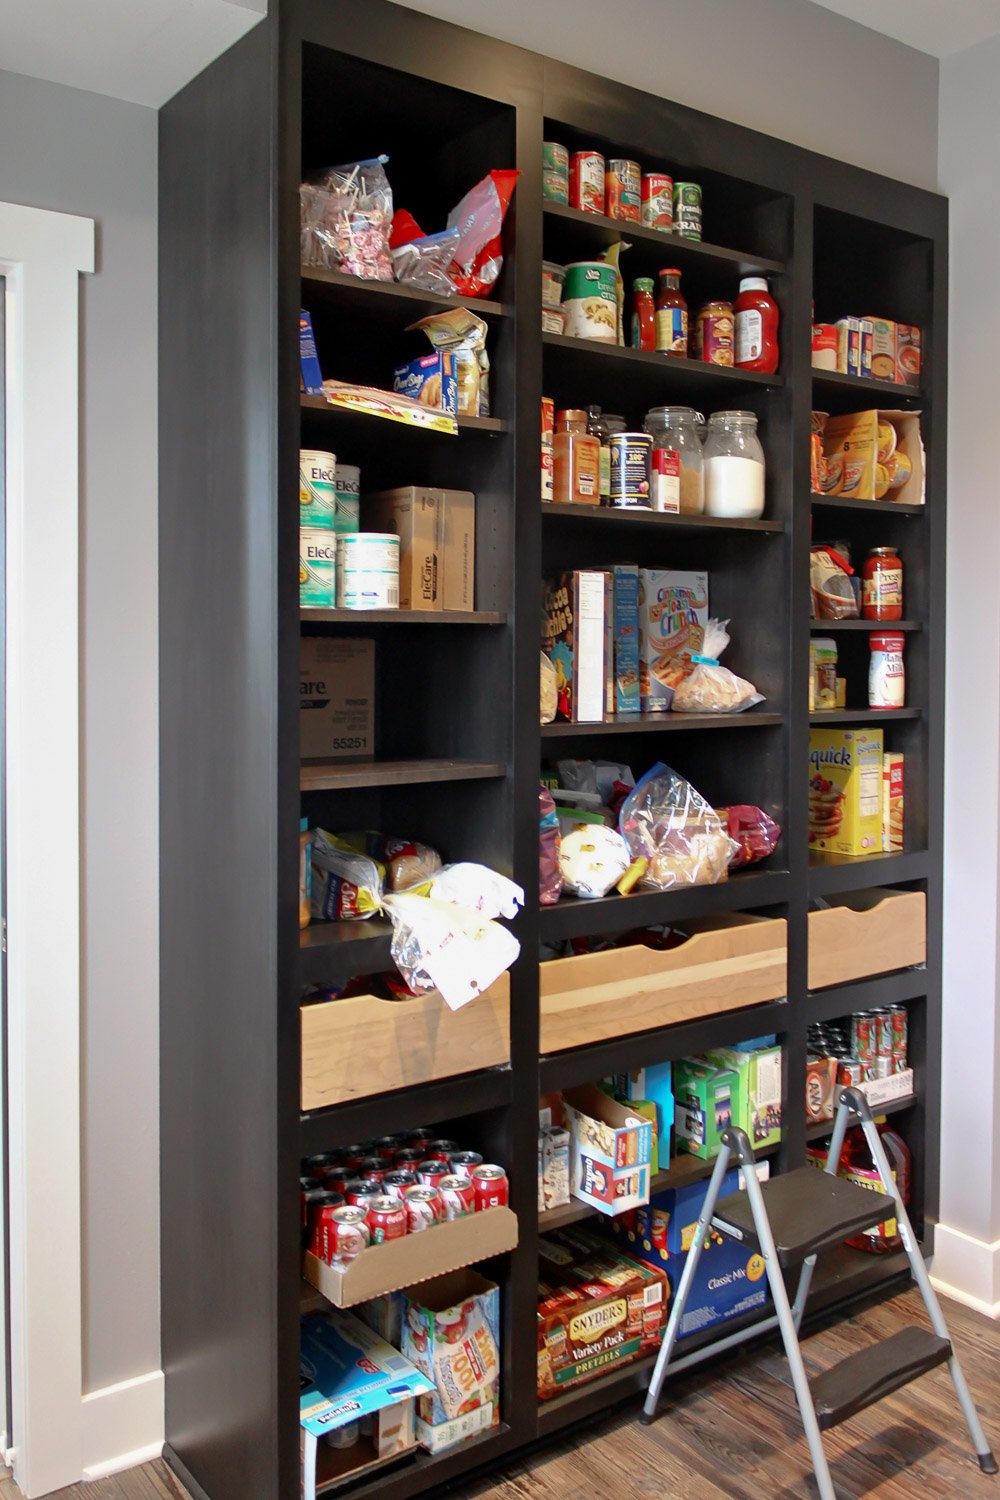 The Best Kitchen Space-Creator Isn't A Walk-In Pantry, It's THIS: — DESIGNED